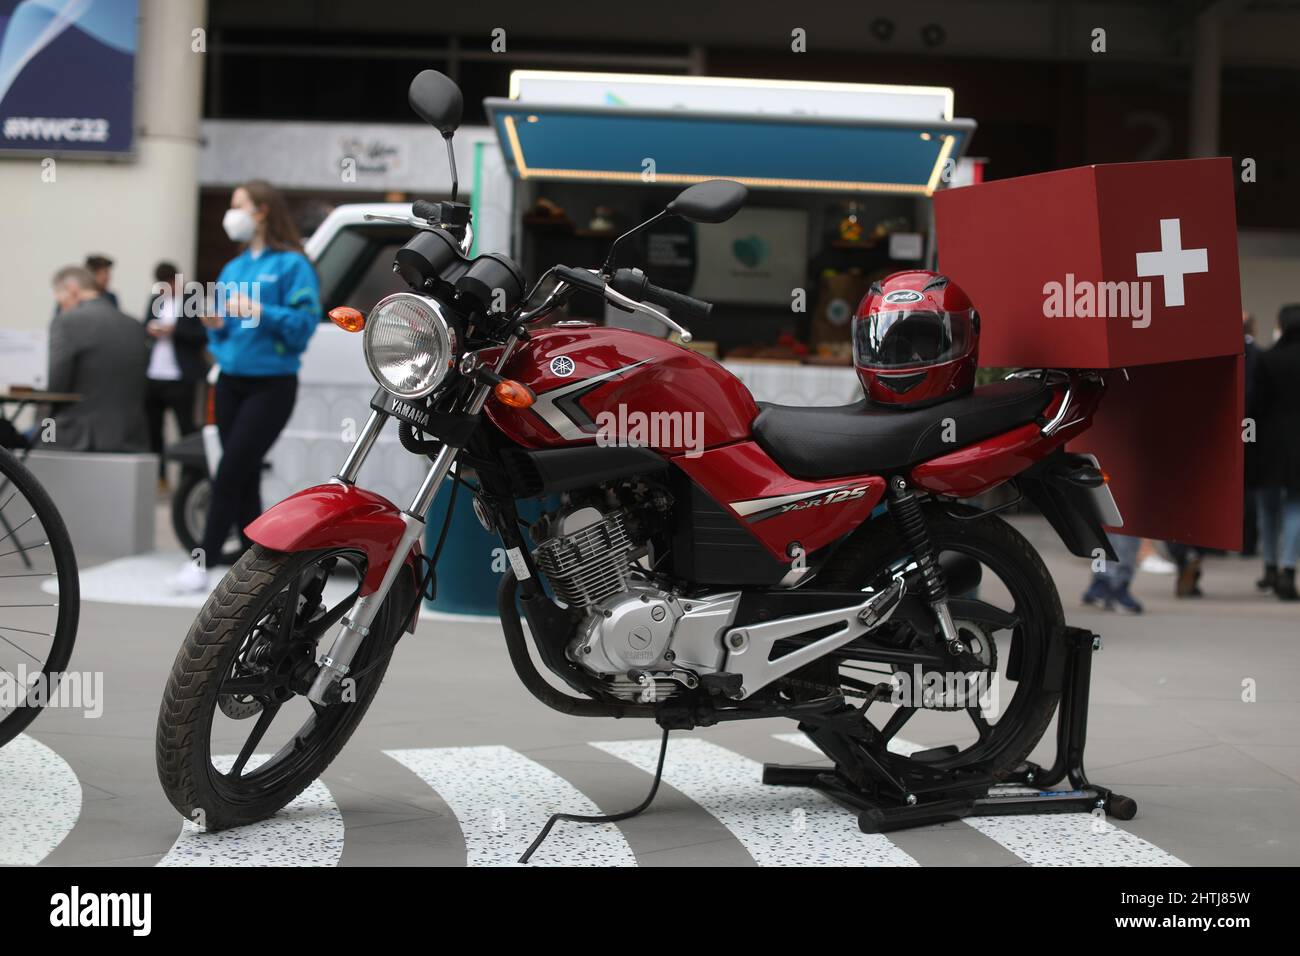 Barcelona, Spain. 28th Feb, 2022. A bike is on display to promote the OneBlood's donor app at the Android Village during the Mobile World Congress (MWC), the annual trade show organised by GSMA at the Fira de Barcelona, Spain. Stock Photo